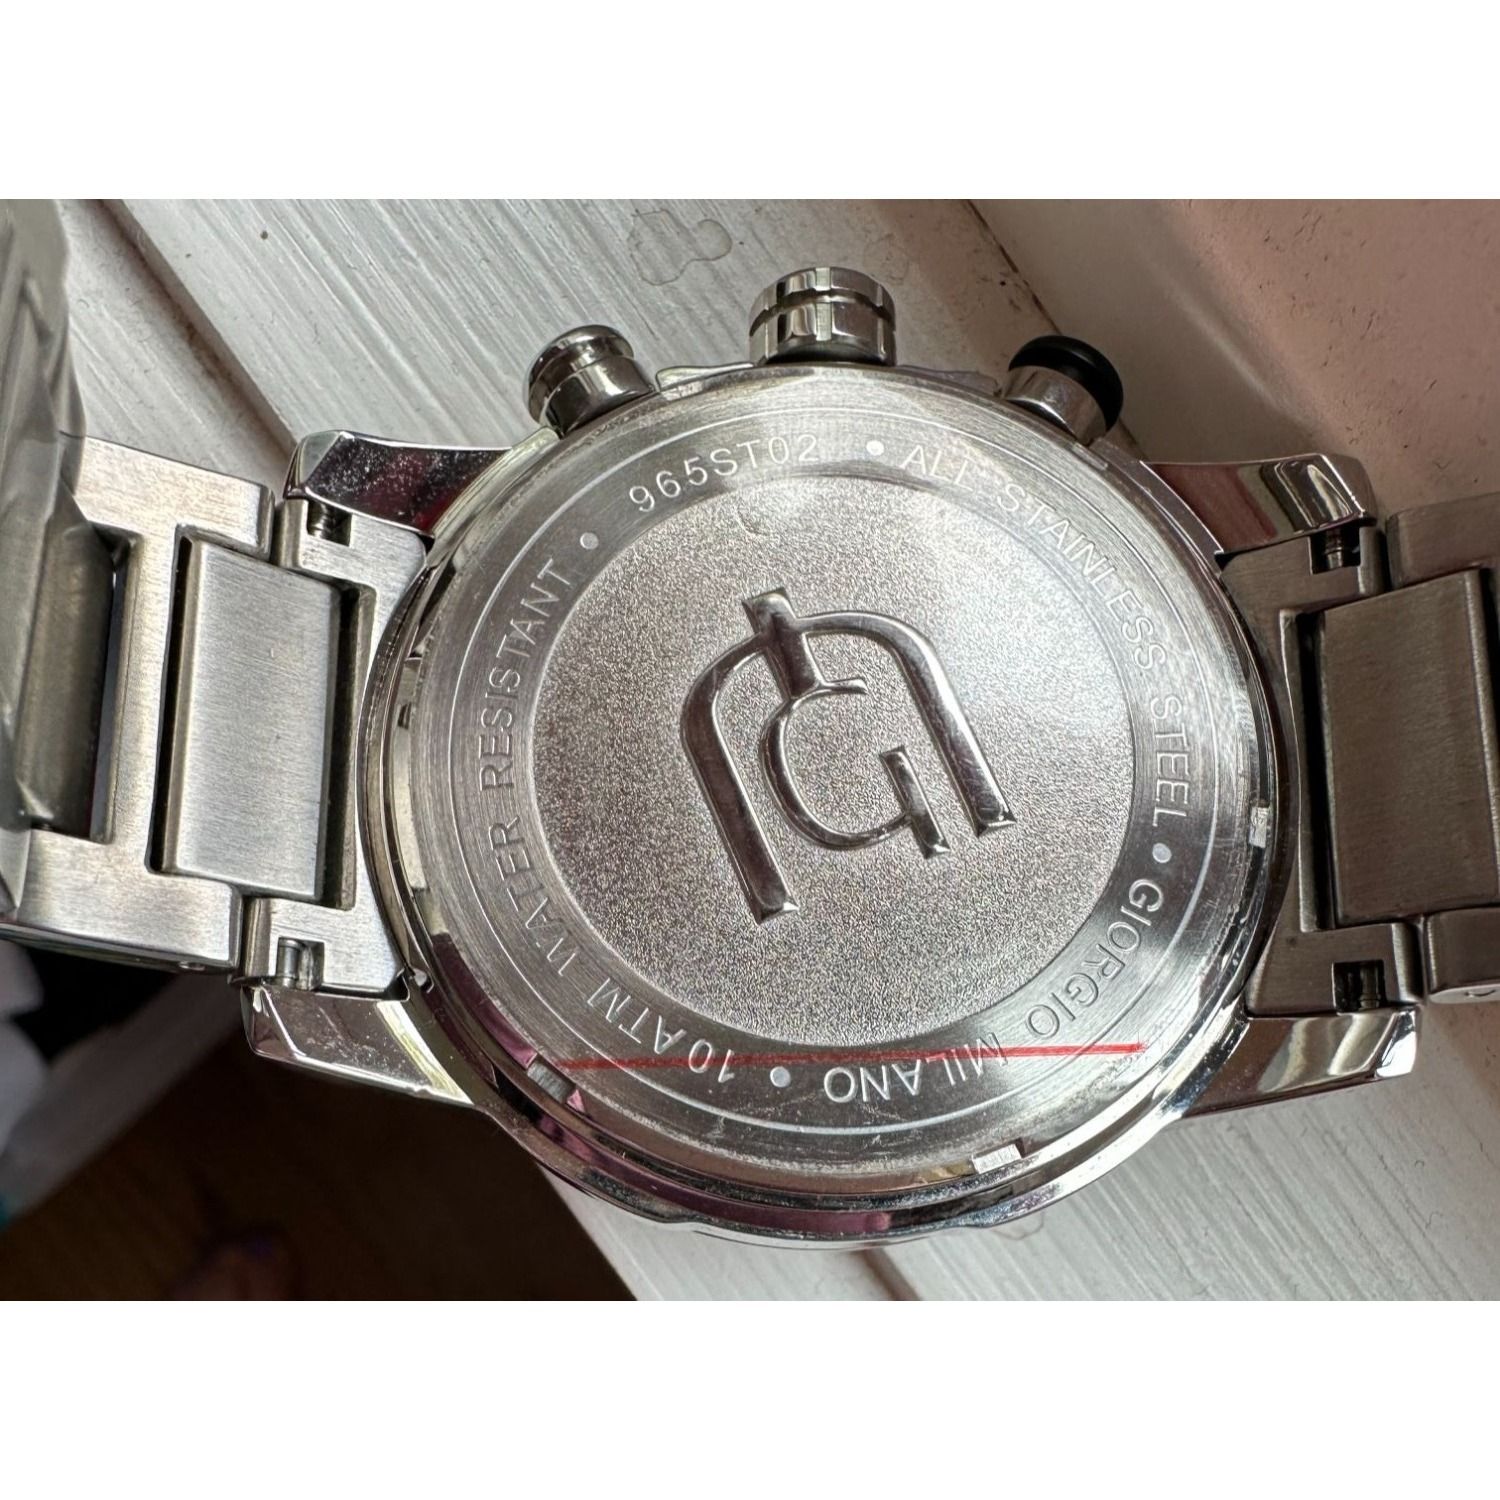 Unbrnd silver designer watch by Giorgio Milano 965ST02 Size ONE SIZE - 1 Preview